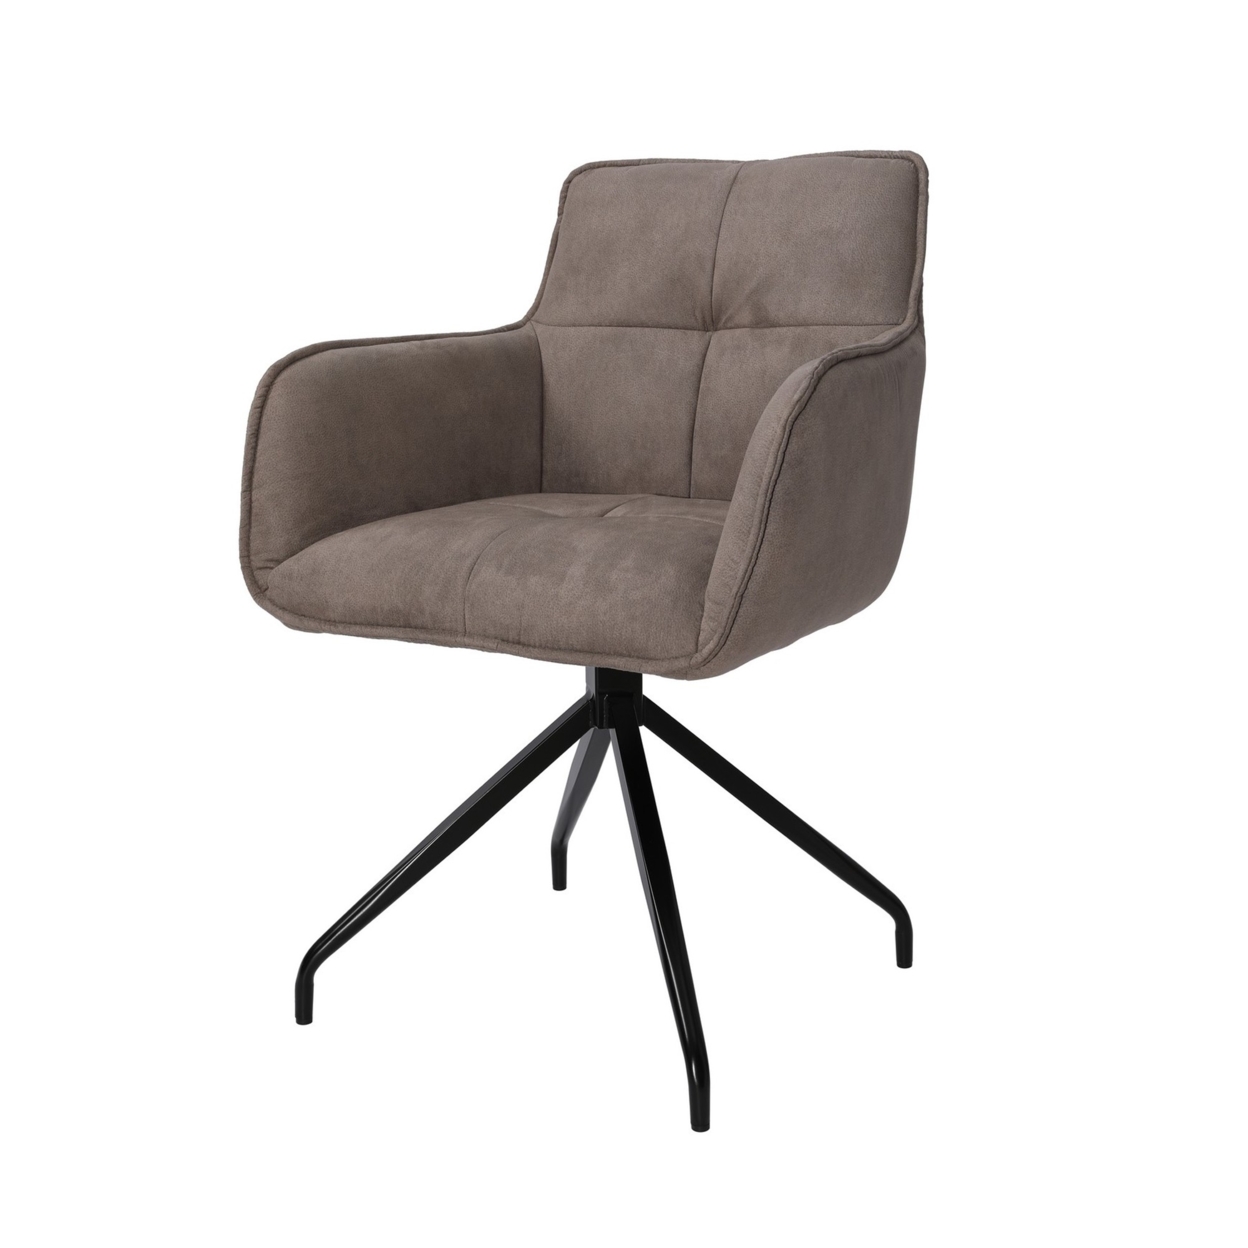 Arm Chair With Fabric Swivel Seat And Metal Claw Feet, Brown - Saltoro Sherpi